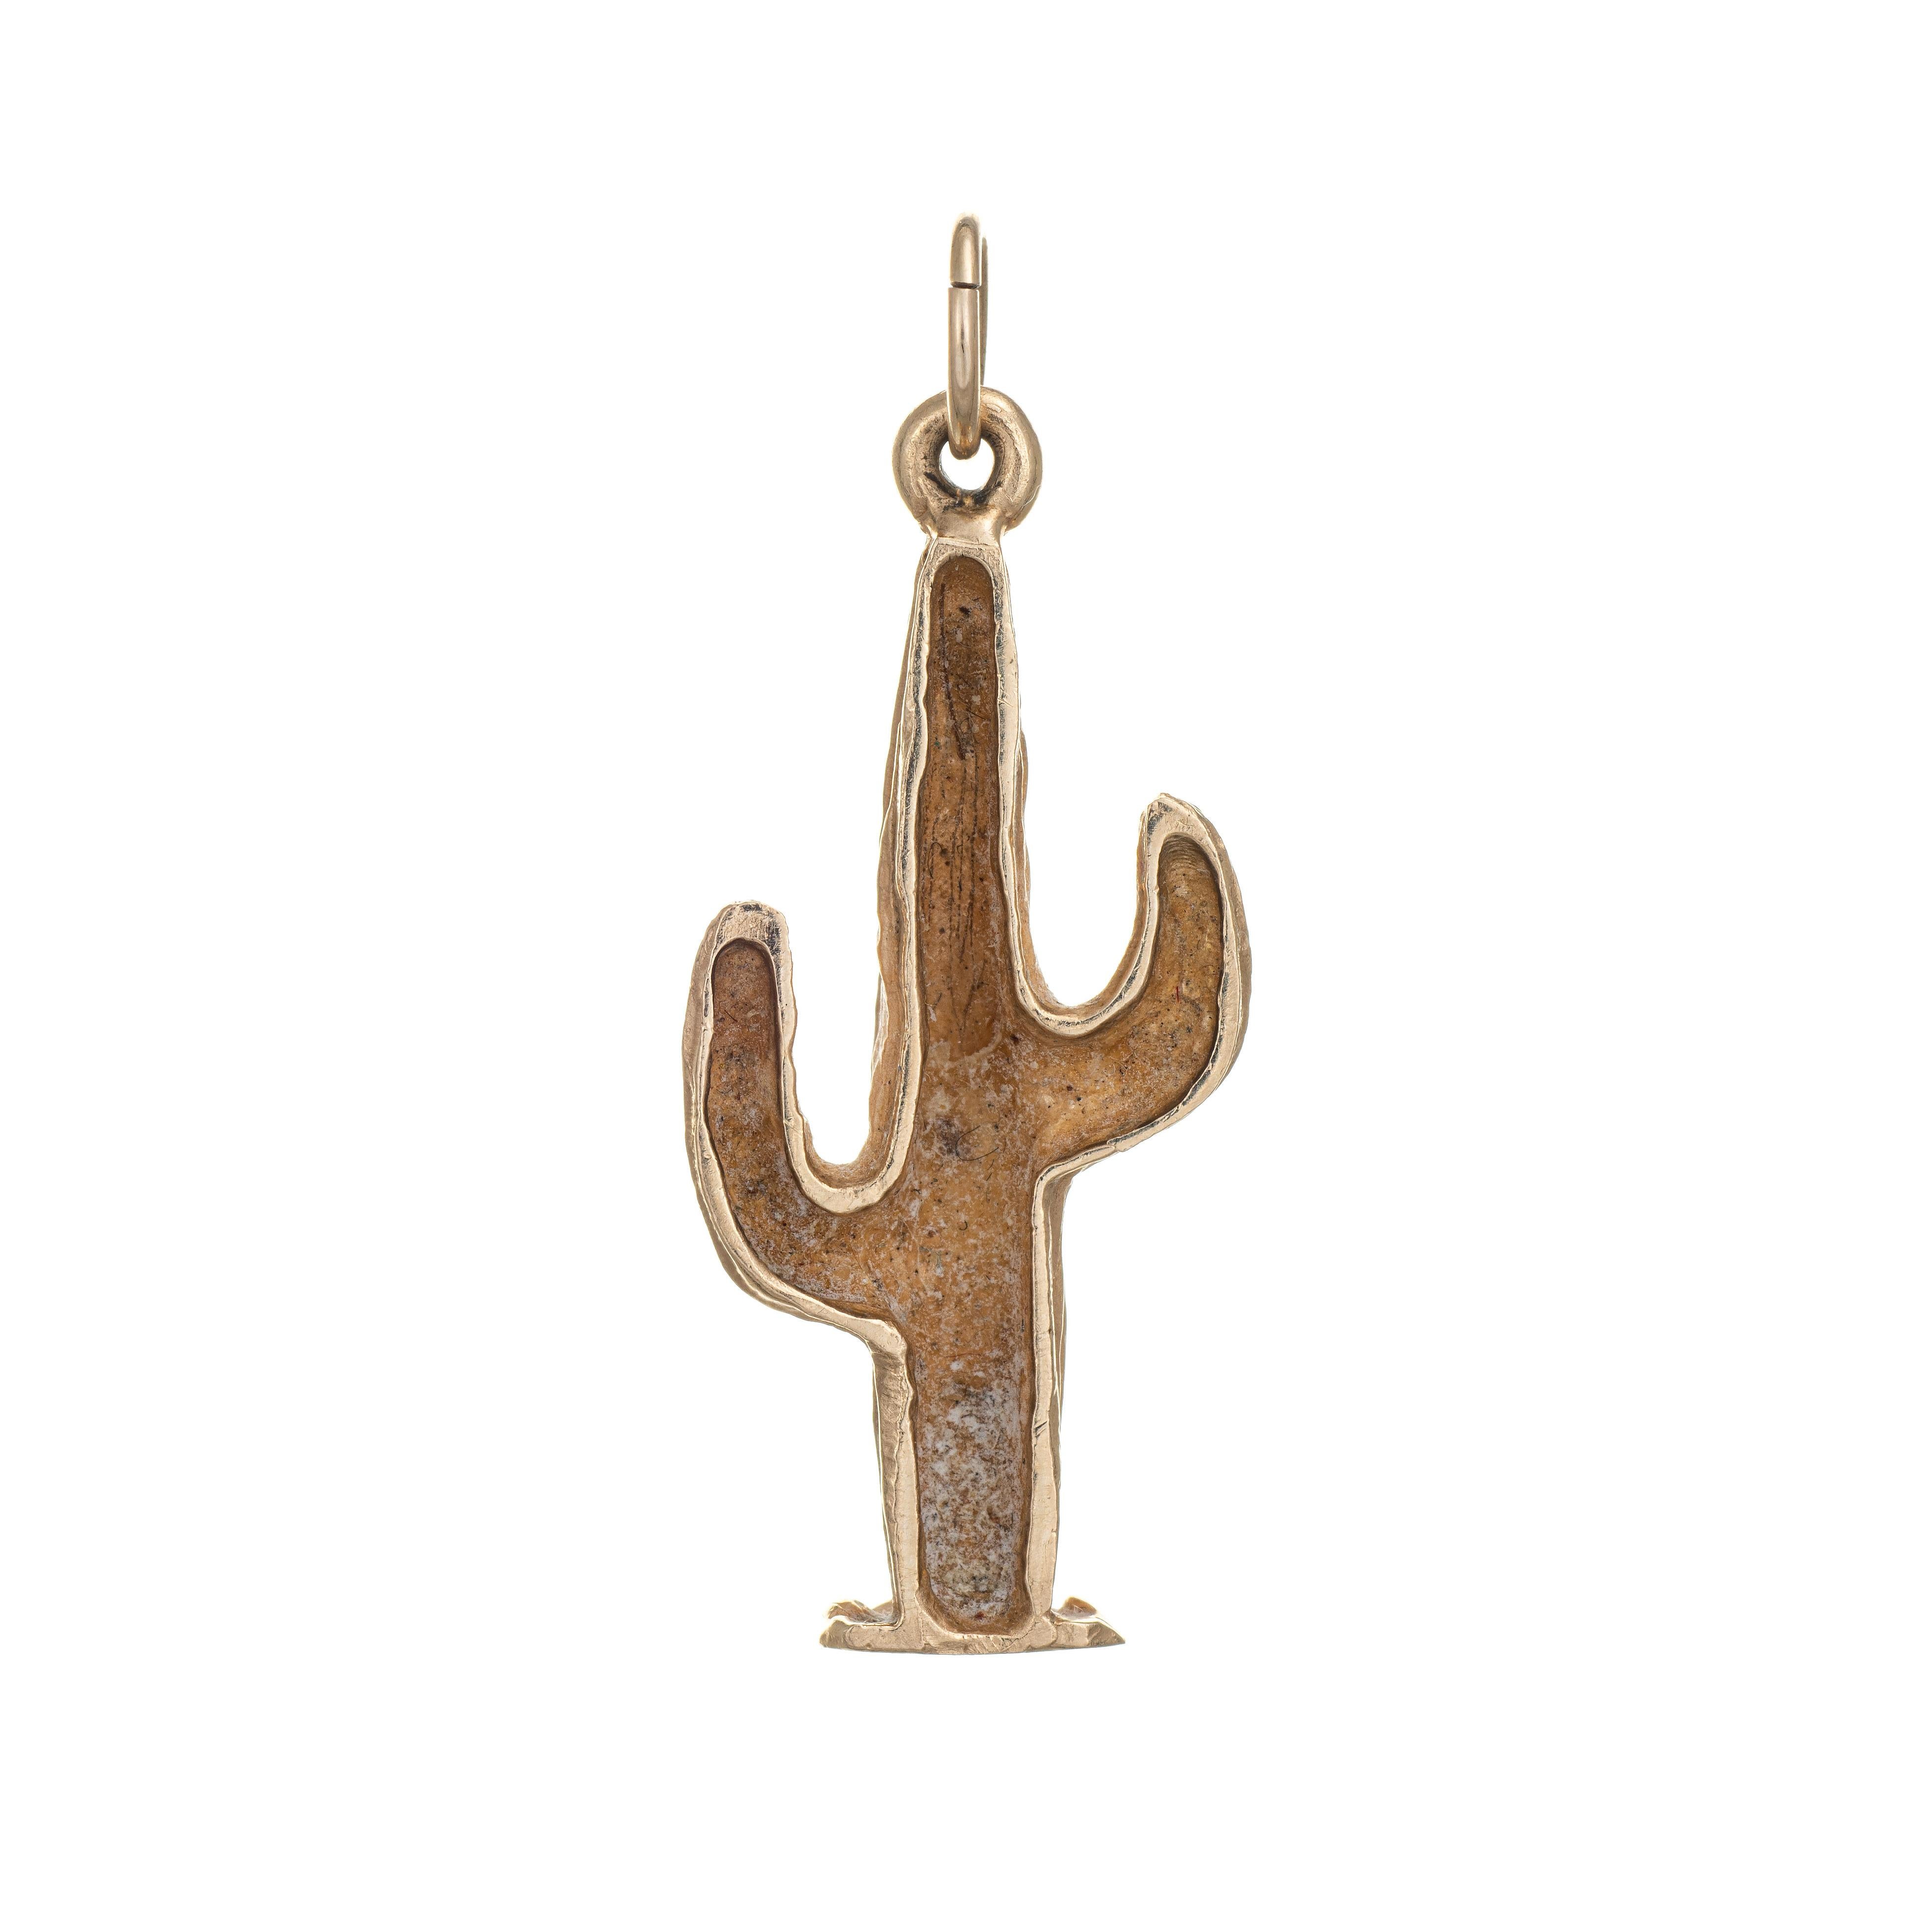 Finely detailed vintage Cactus charm crafted in 14k yellow gold.  

The saguaro cactus features a ridged design for a lifelike look. The piece can be worn as a charm on a bracelet or as a pendant.

The charm is in very good condition. We have not